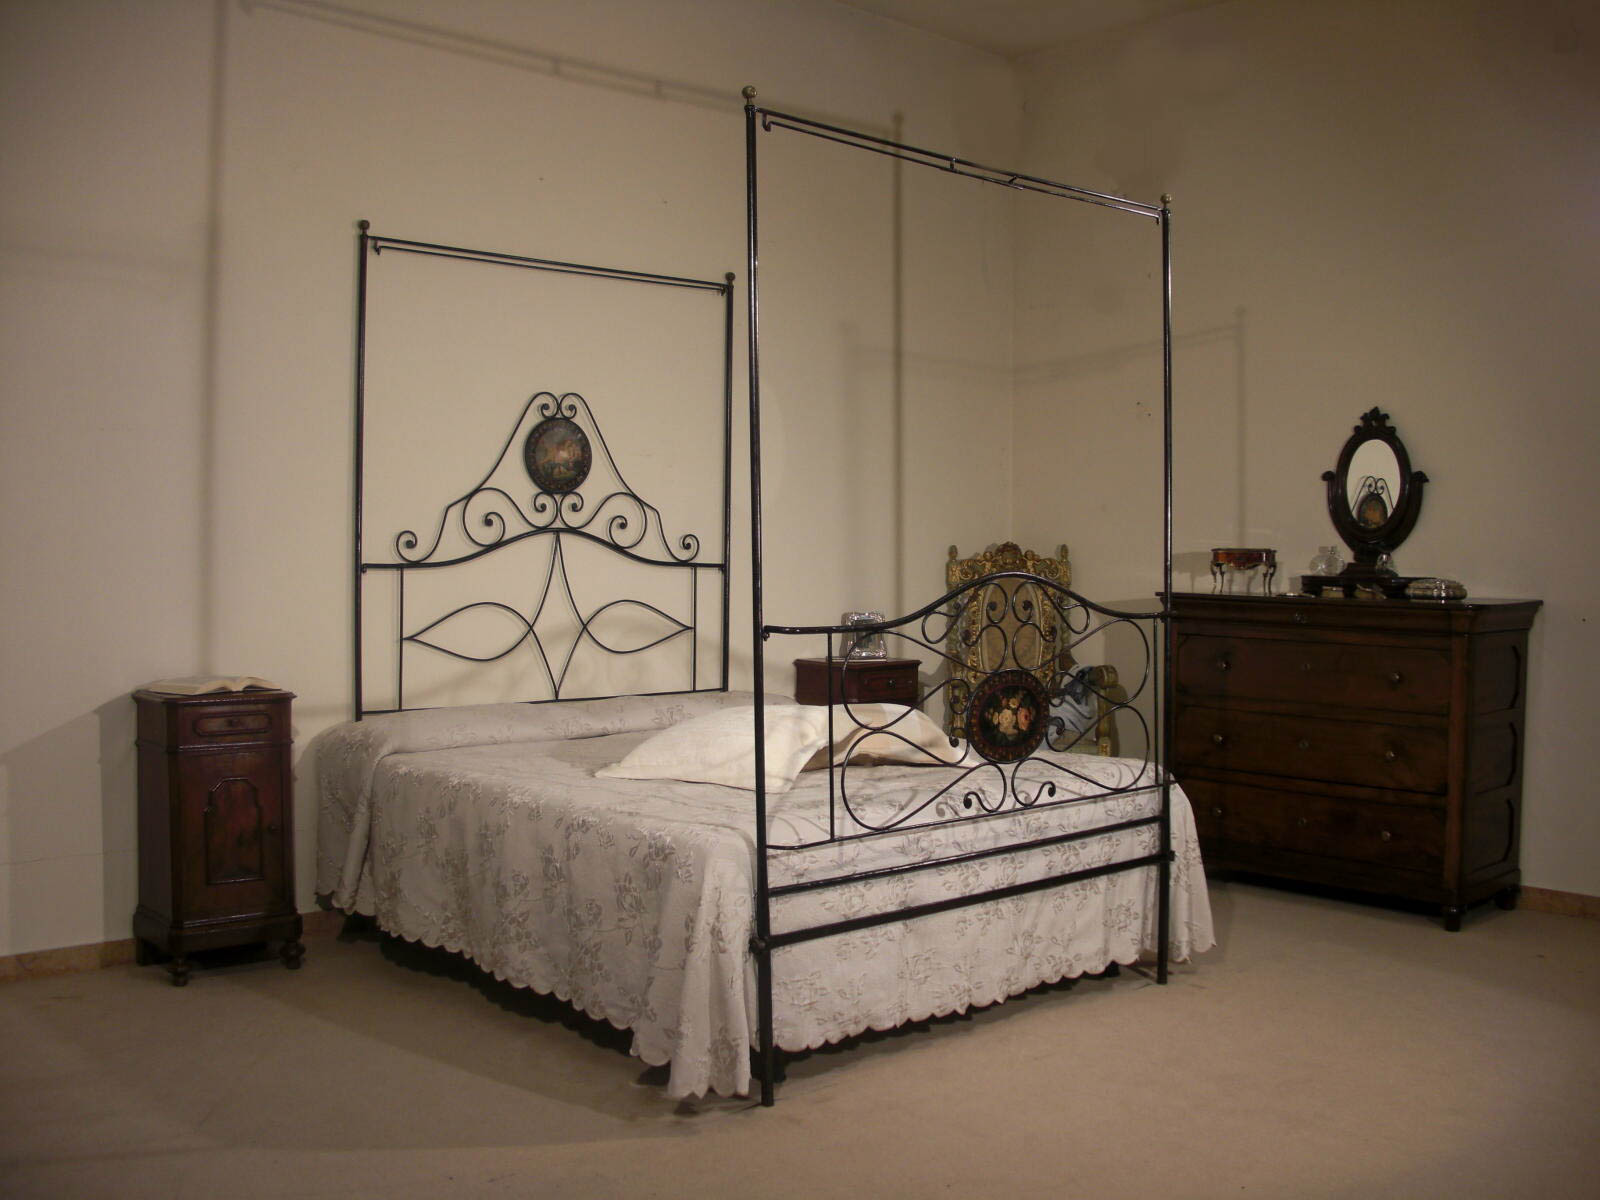 letto ferro baldacchino dipinto olio epoca 800 iron canopy bed painted in oil from the 19th century